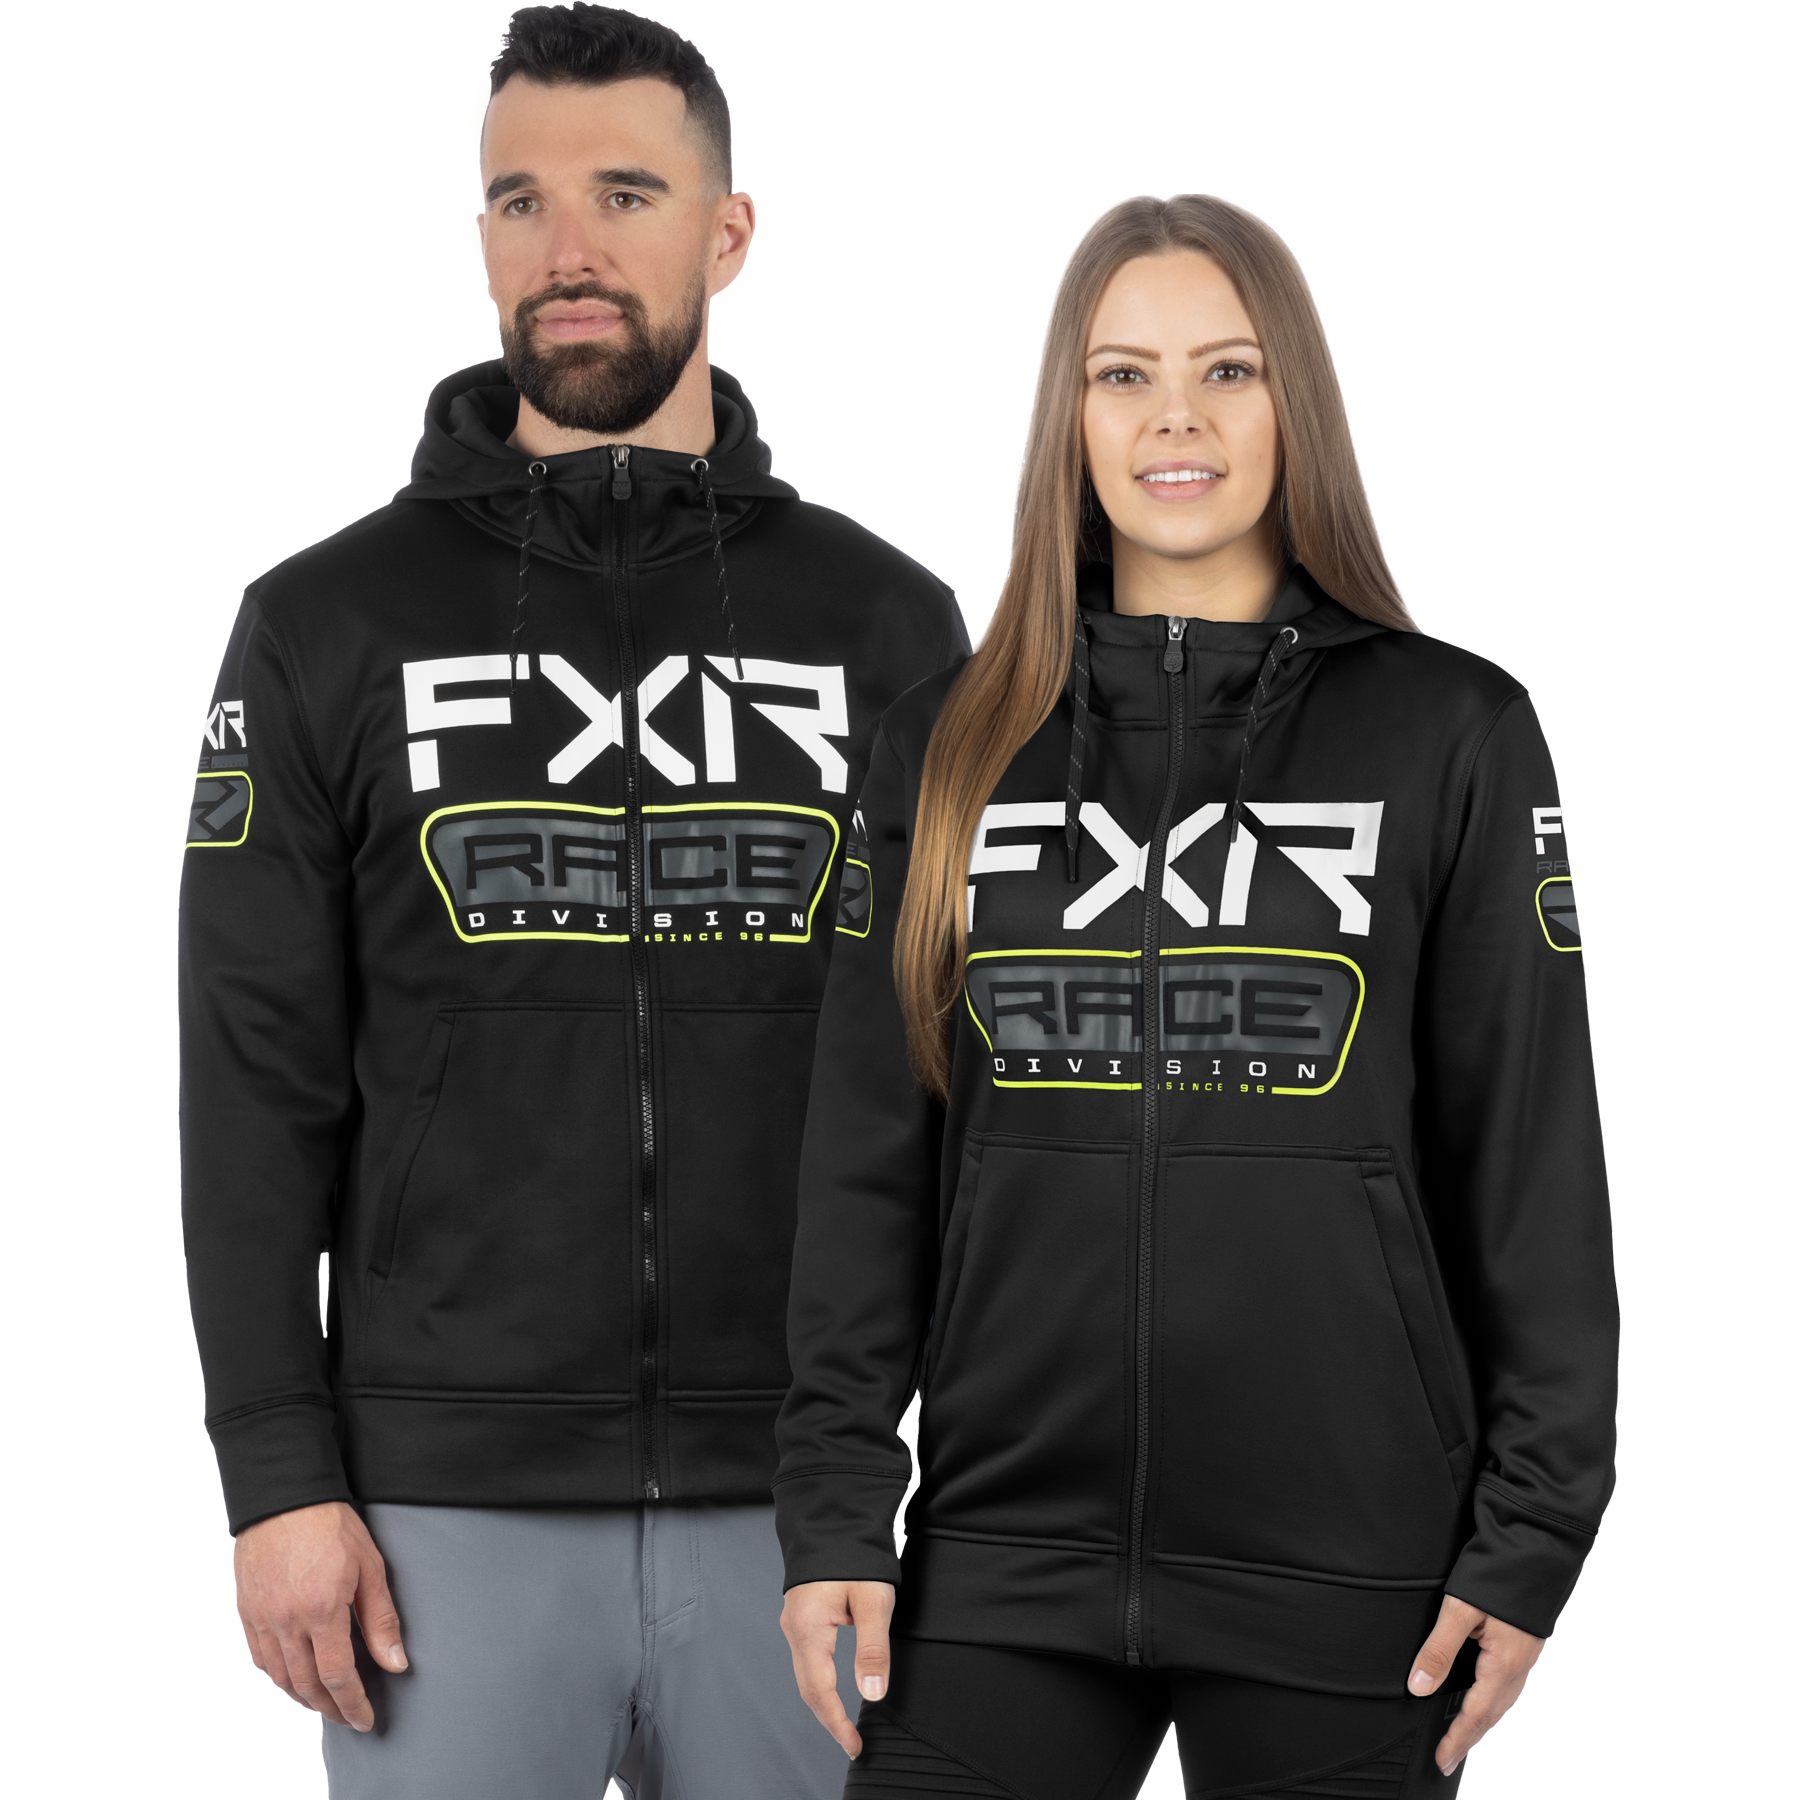 fxr racing hoodies for mens adult unisex race division tech